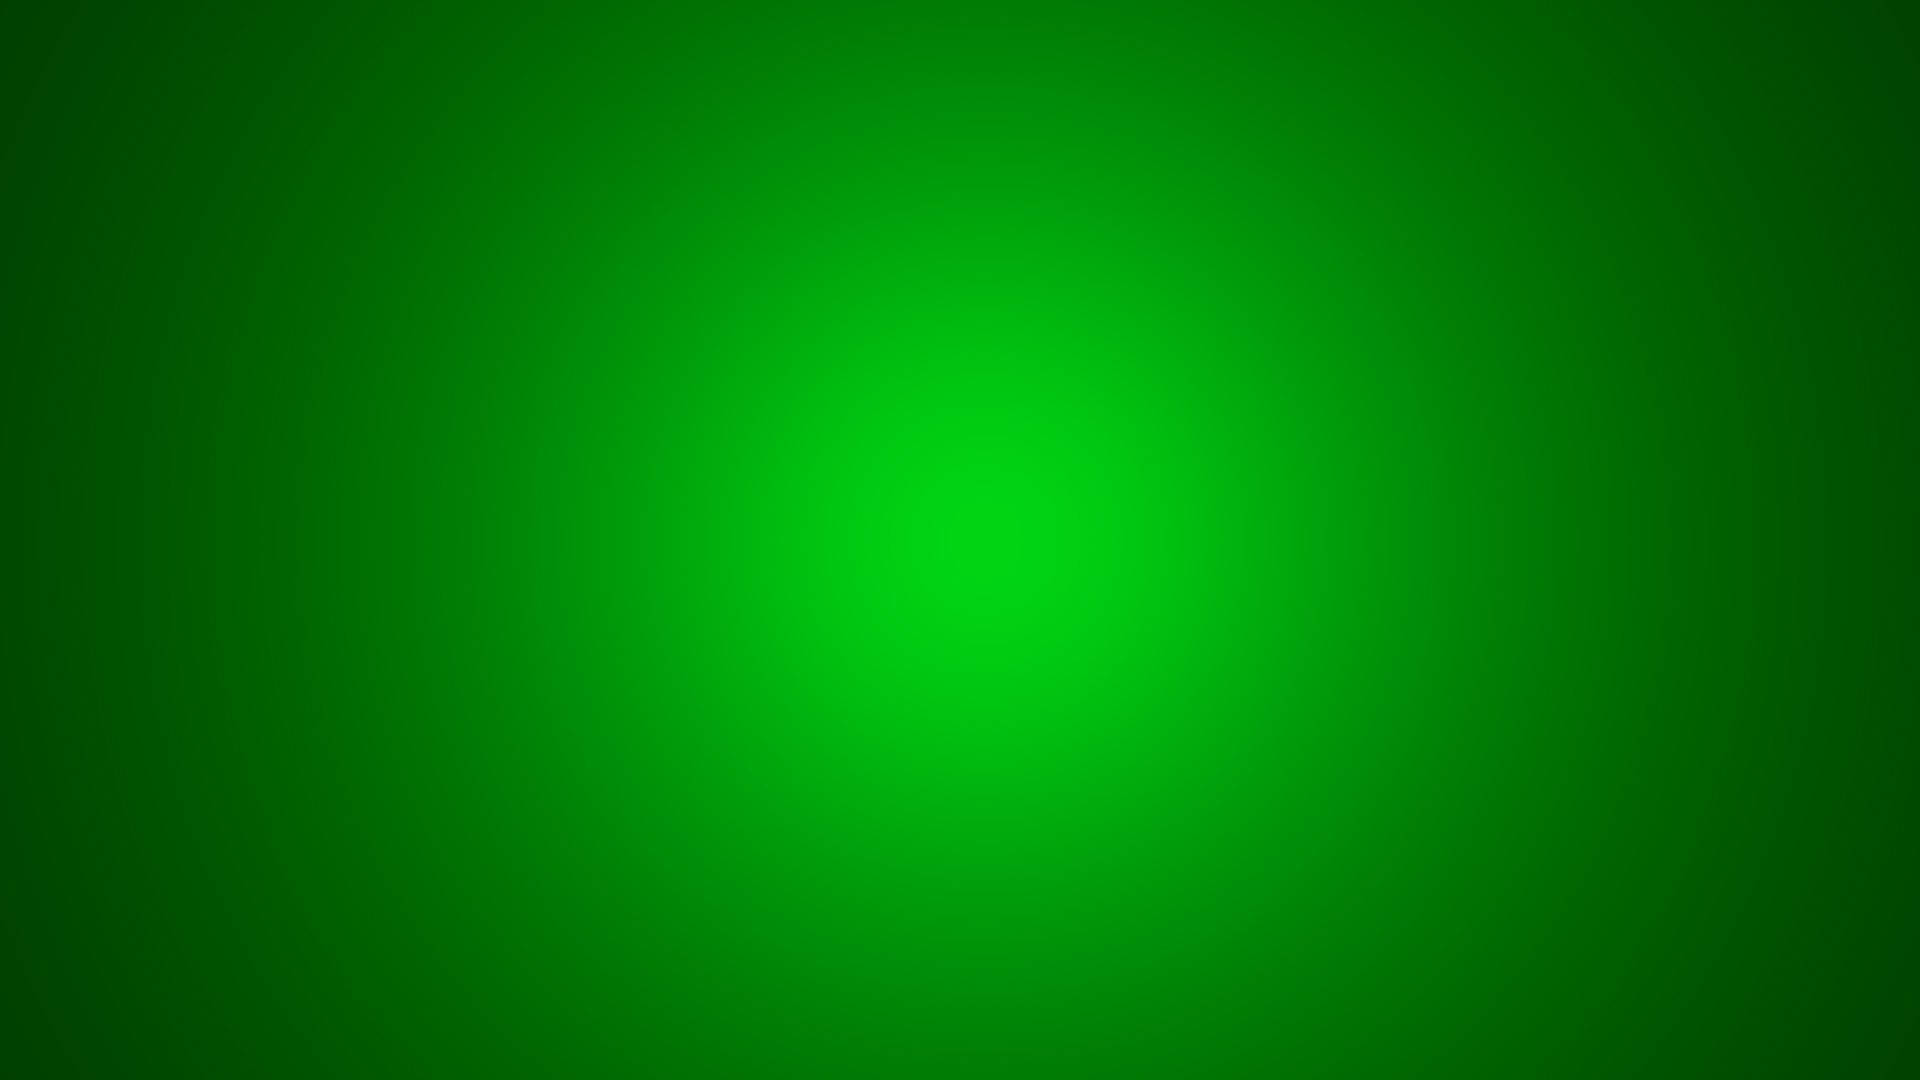 142231 Green Solid Background Images Stock Photos  Vectors  Shutterstock